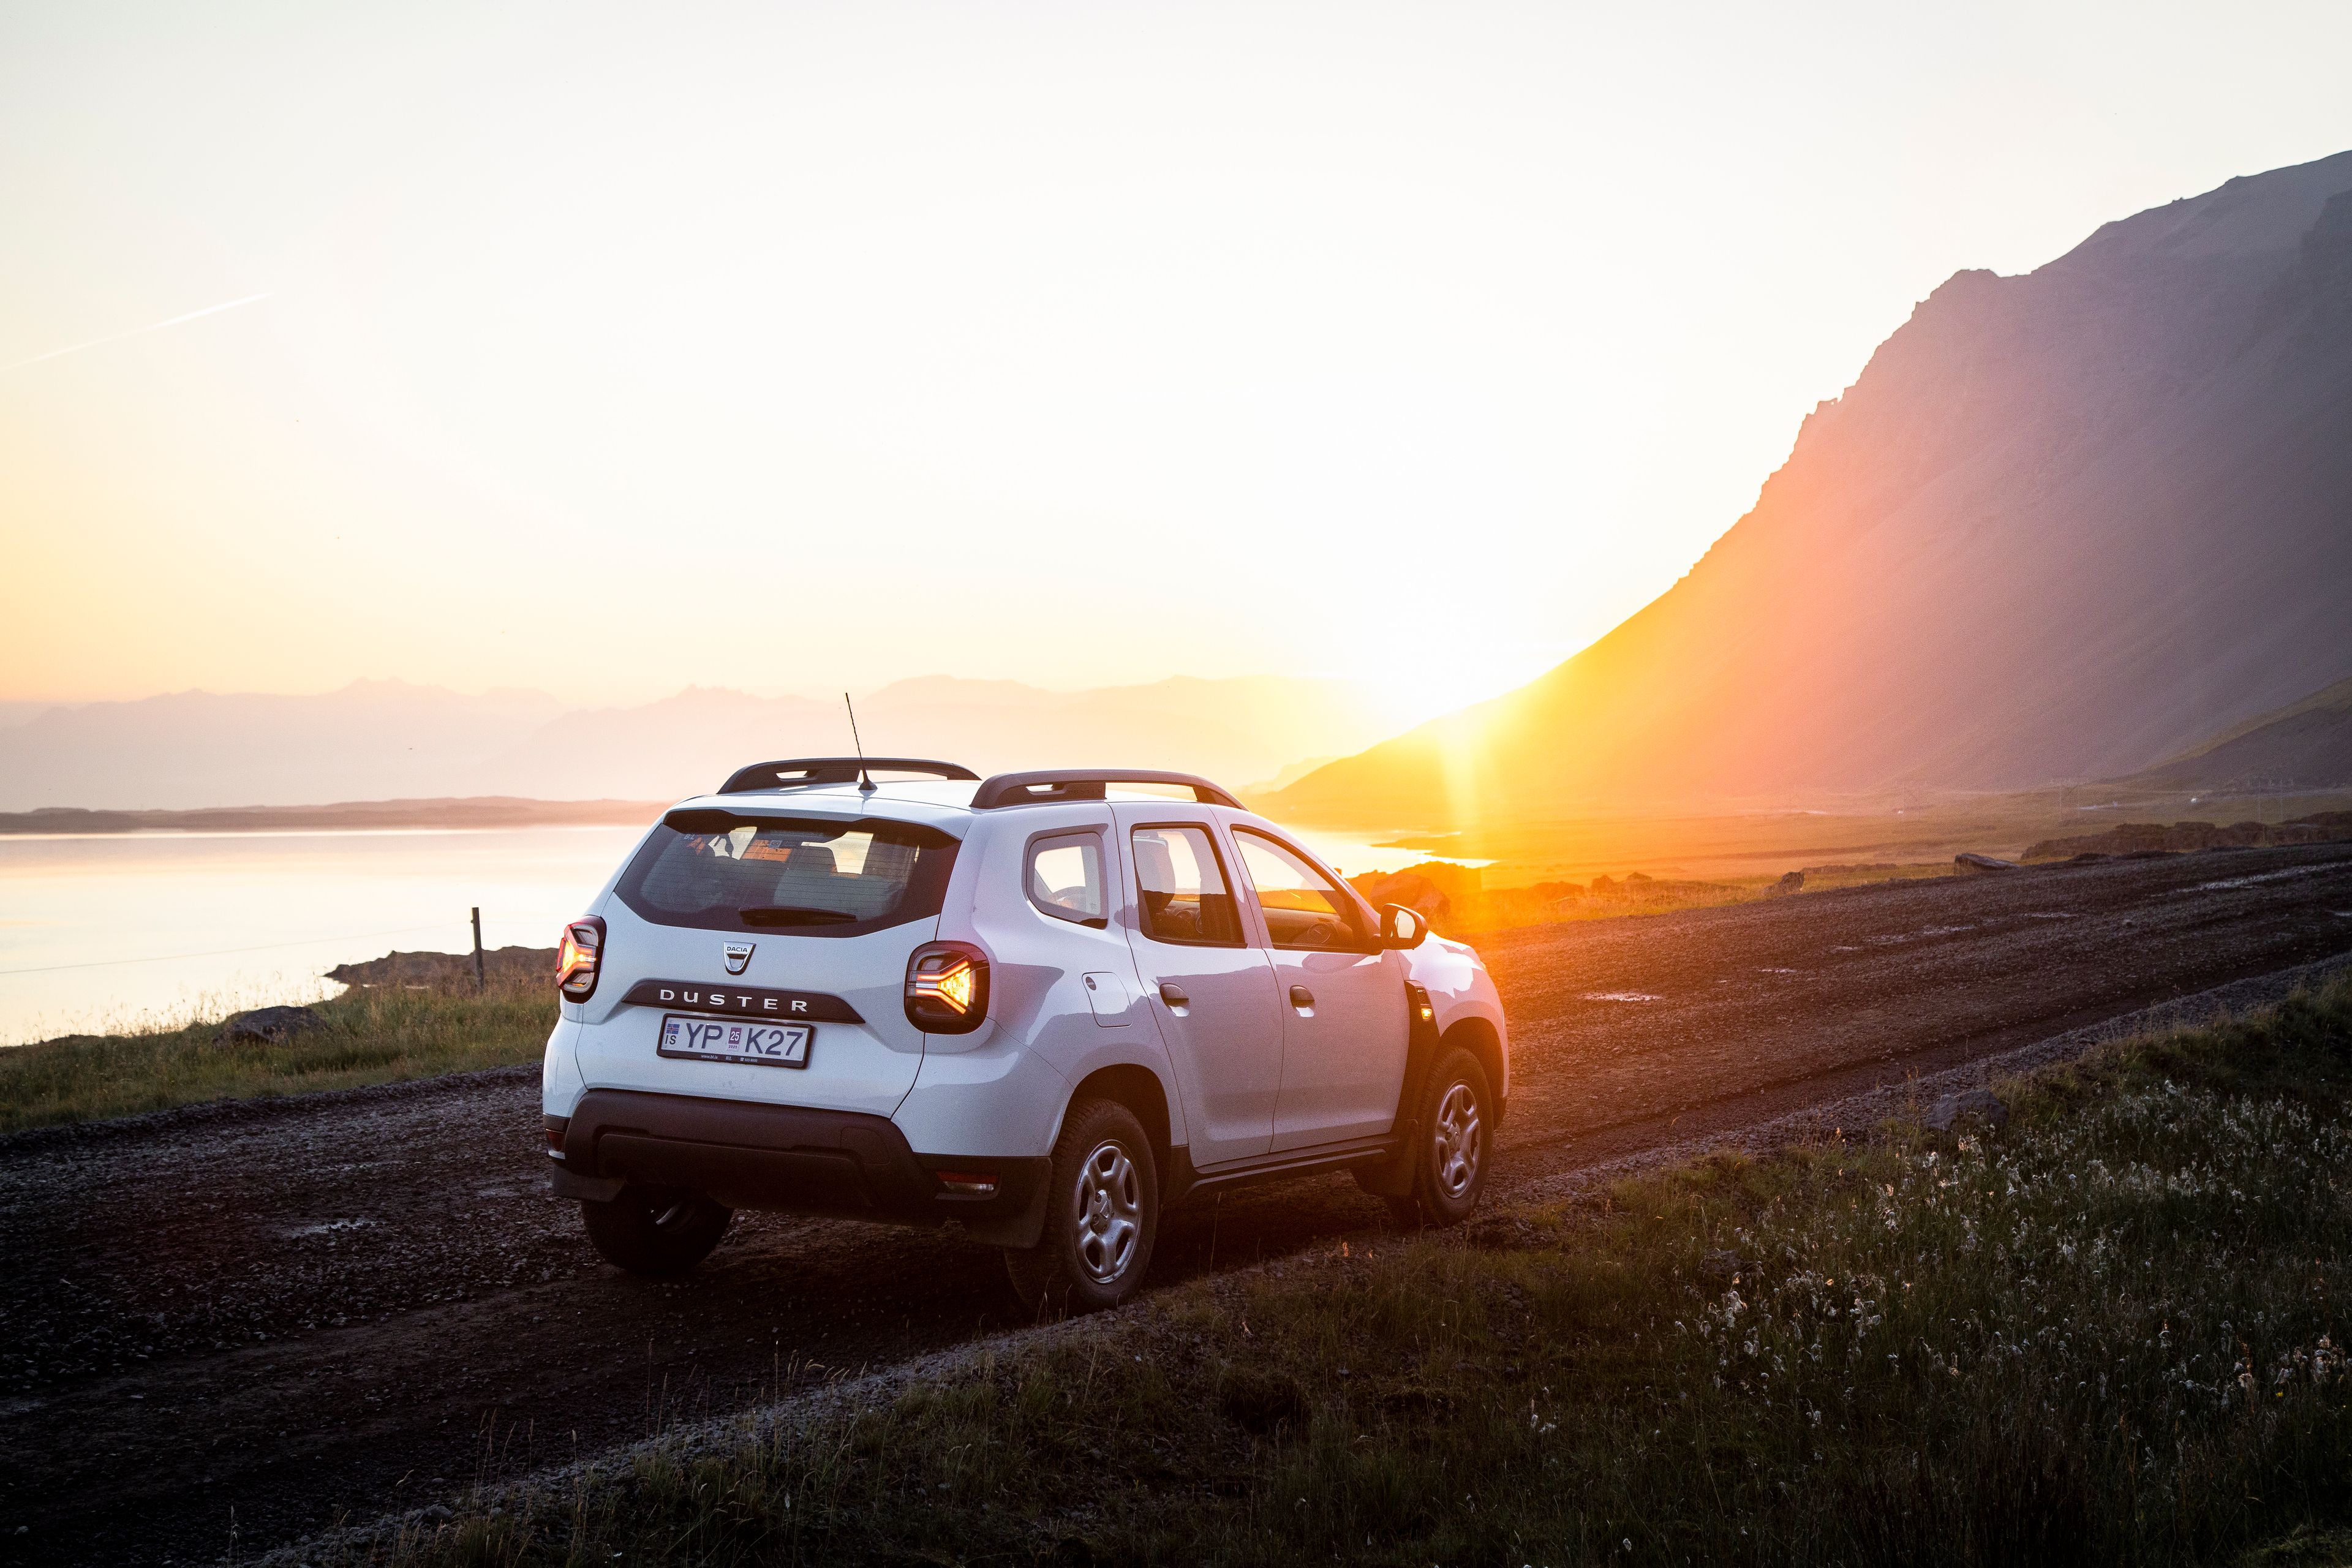 White 4x4 Dacia Duster rental car parked in Iceland while watching the sunset